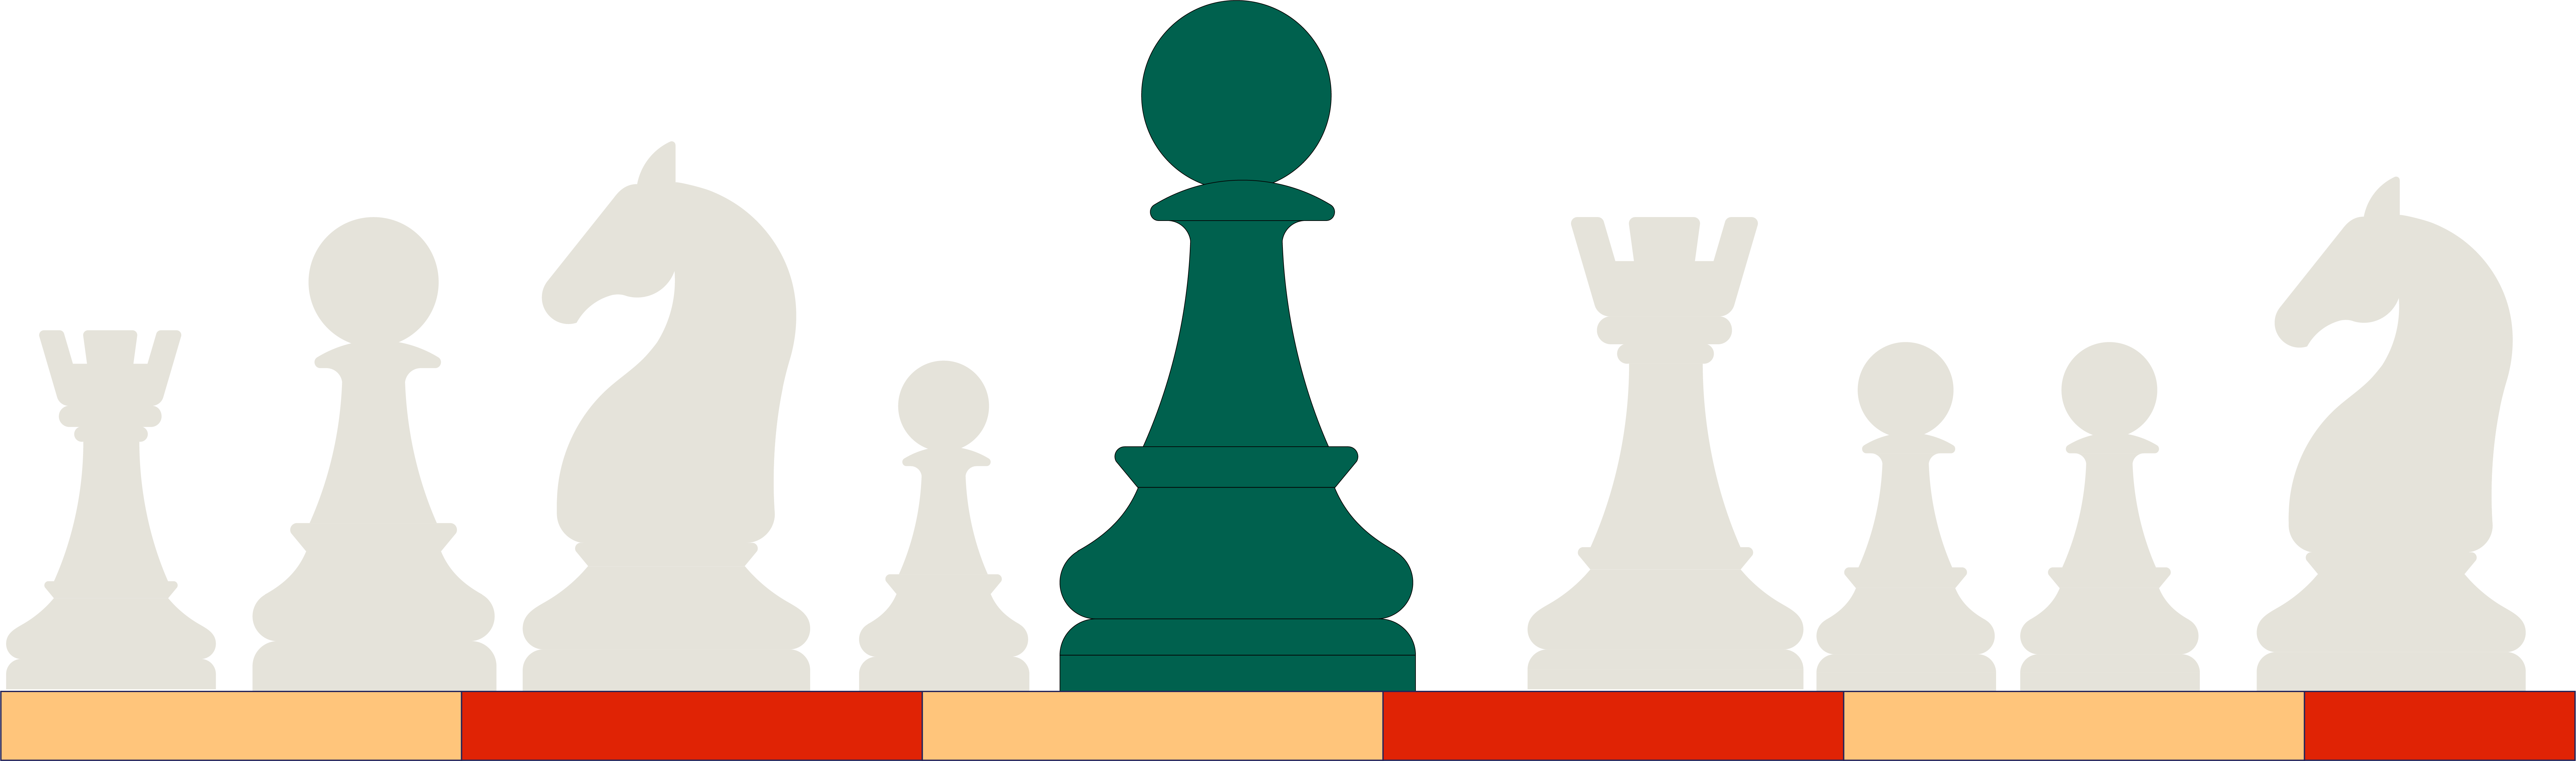 TIL there is a term called zugzwang, to describe a situation in chess  where a player would prefer not moving at all when it's his turn, because  moving any piece would worsen